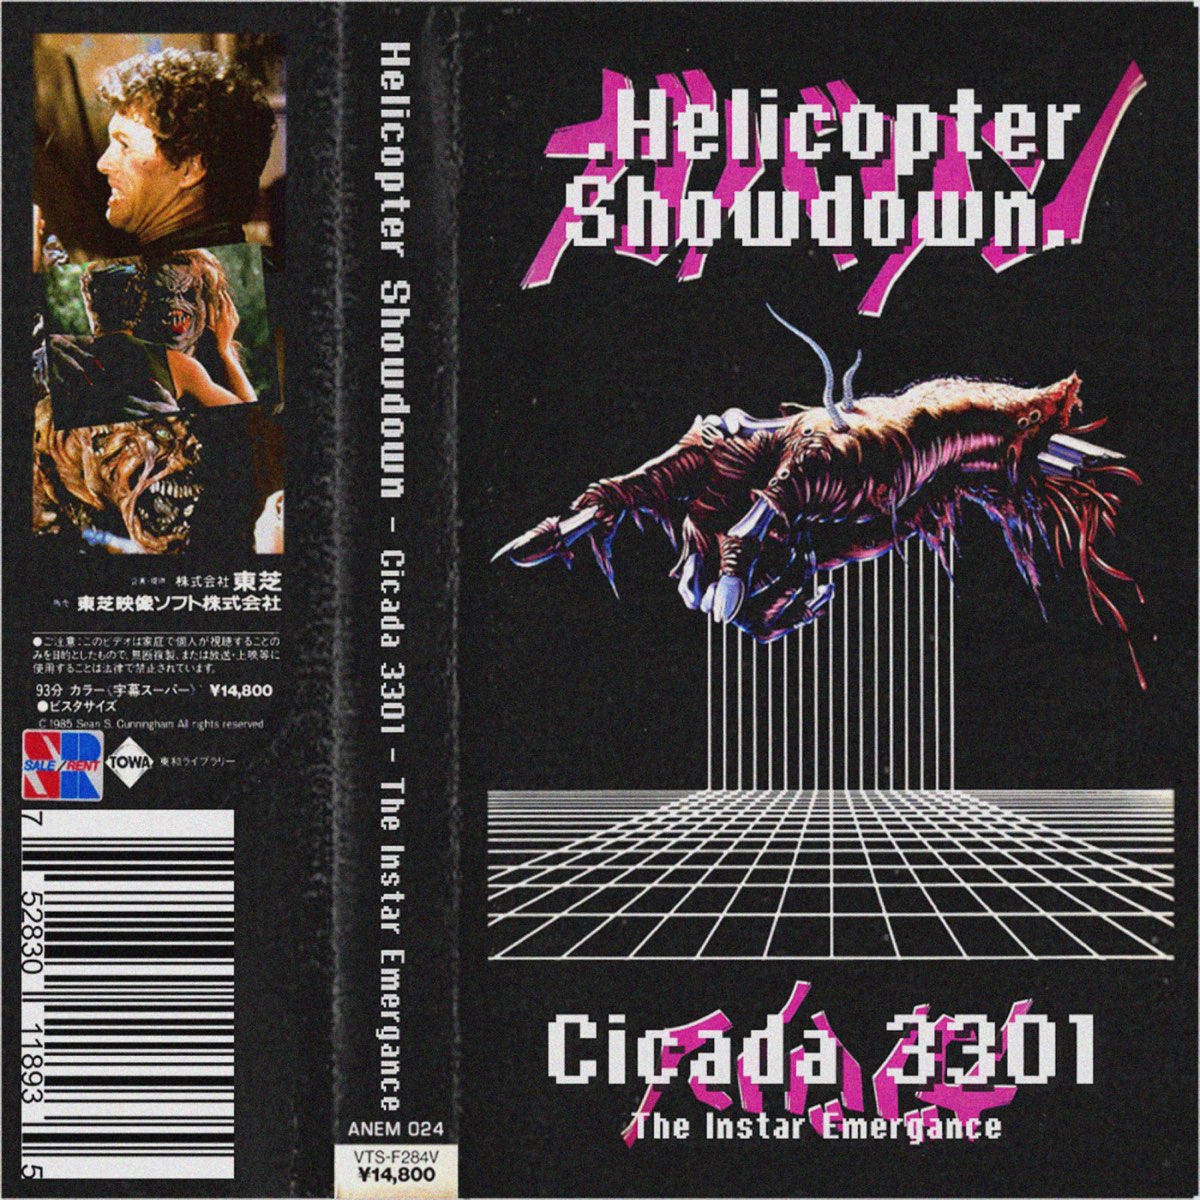 ‎Cicada 3301 Single by Helicopter Showdown on Apple Music